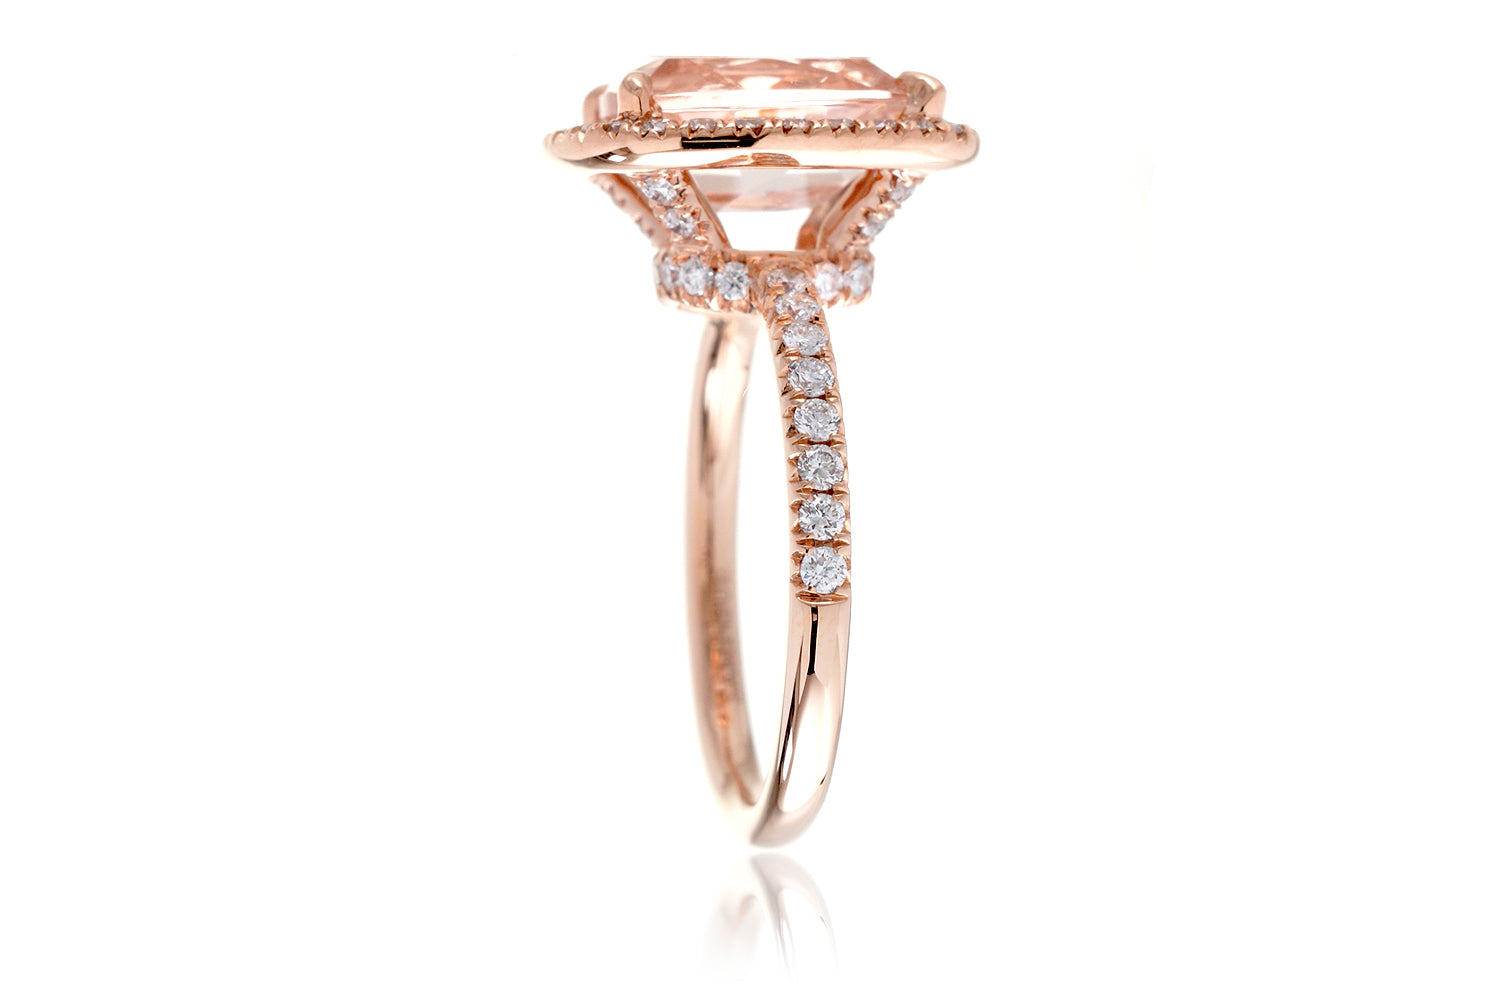 The Drenched Cushion Morganite